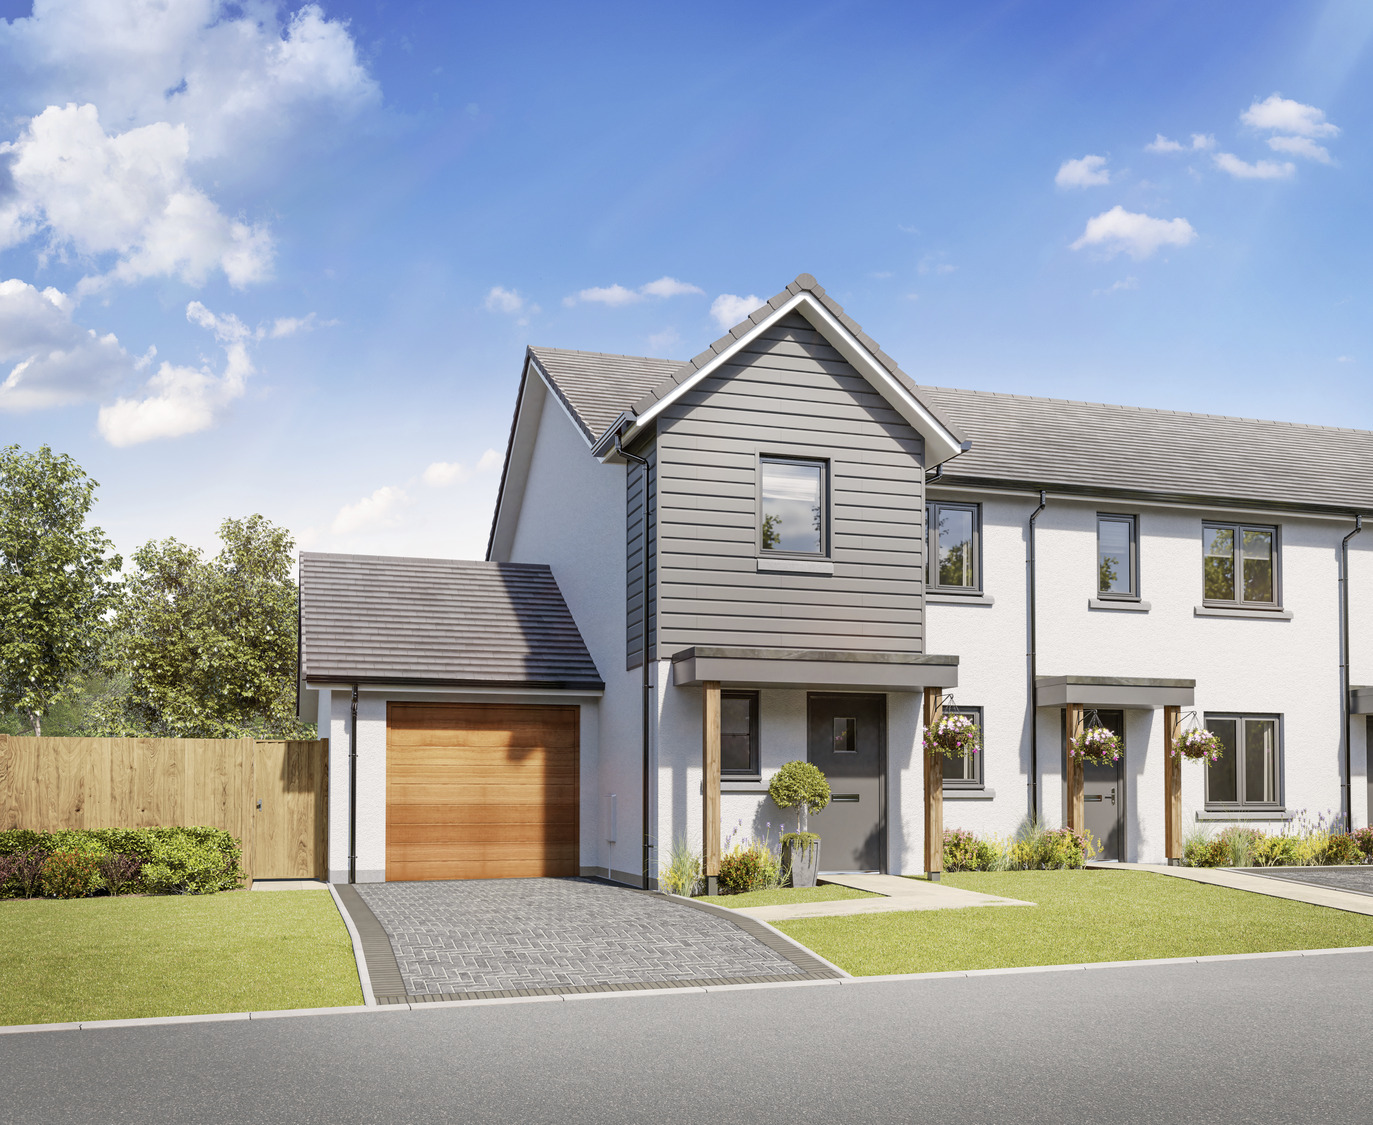 Dandara wins planning approval for further phase at Aberdeen development